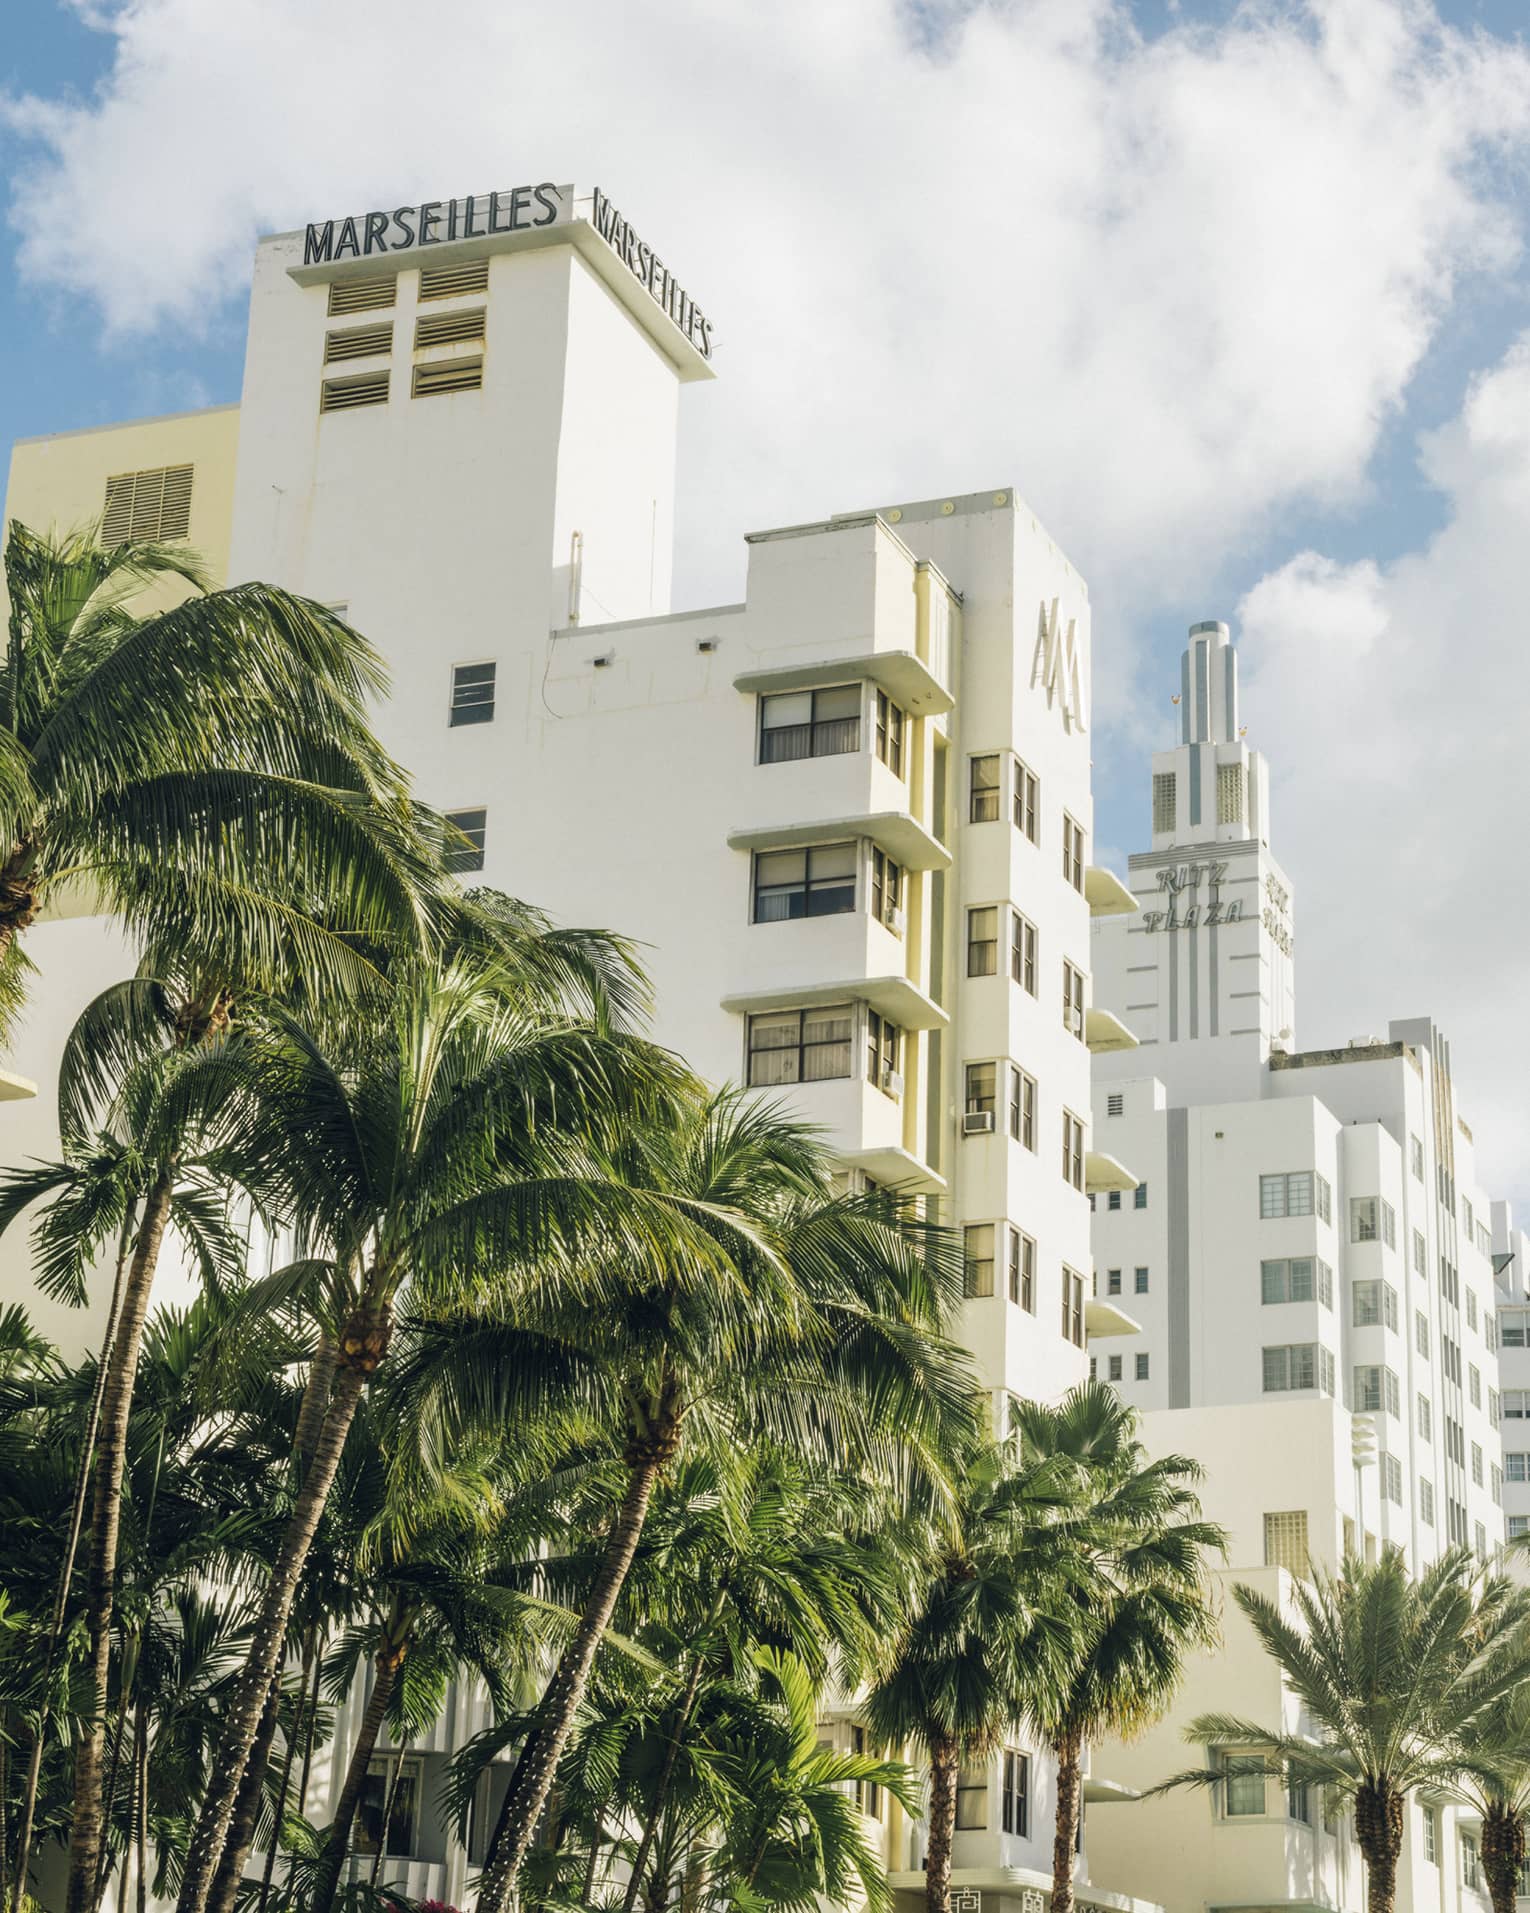 Several hotels in Art Deco buildings are landscaped with palm trees on Collins Avenue.